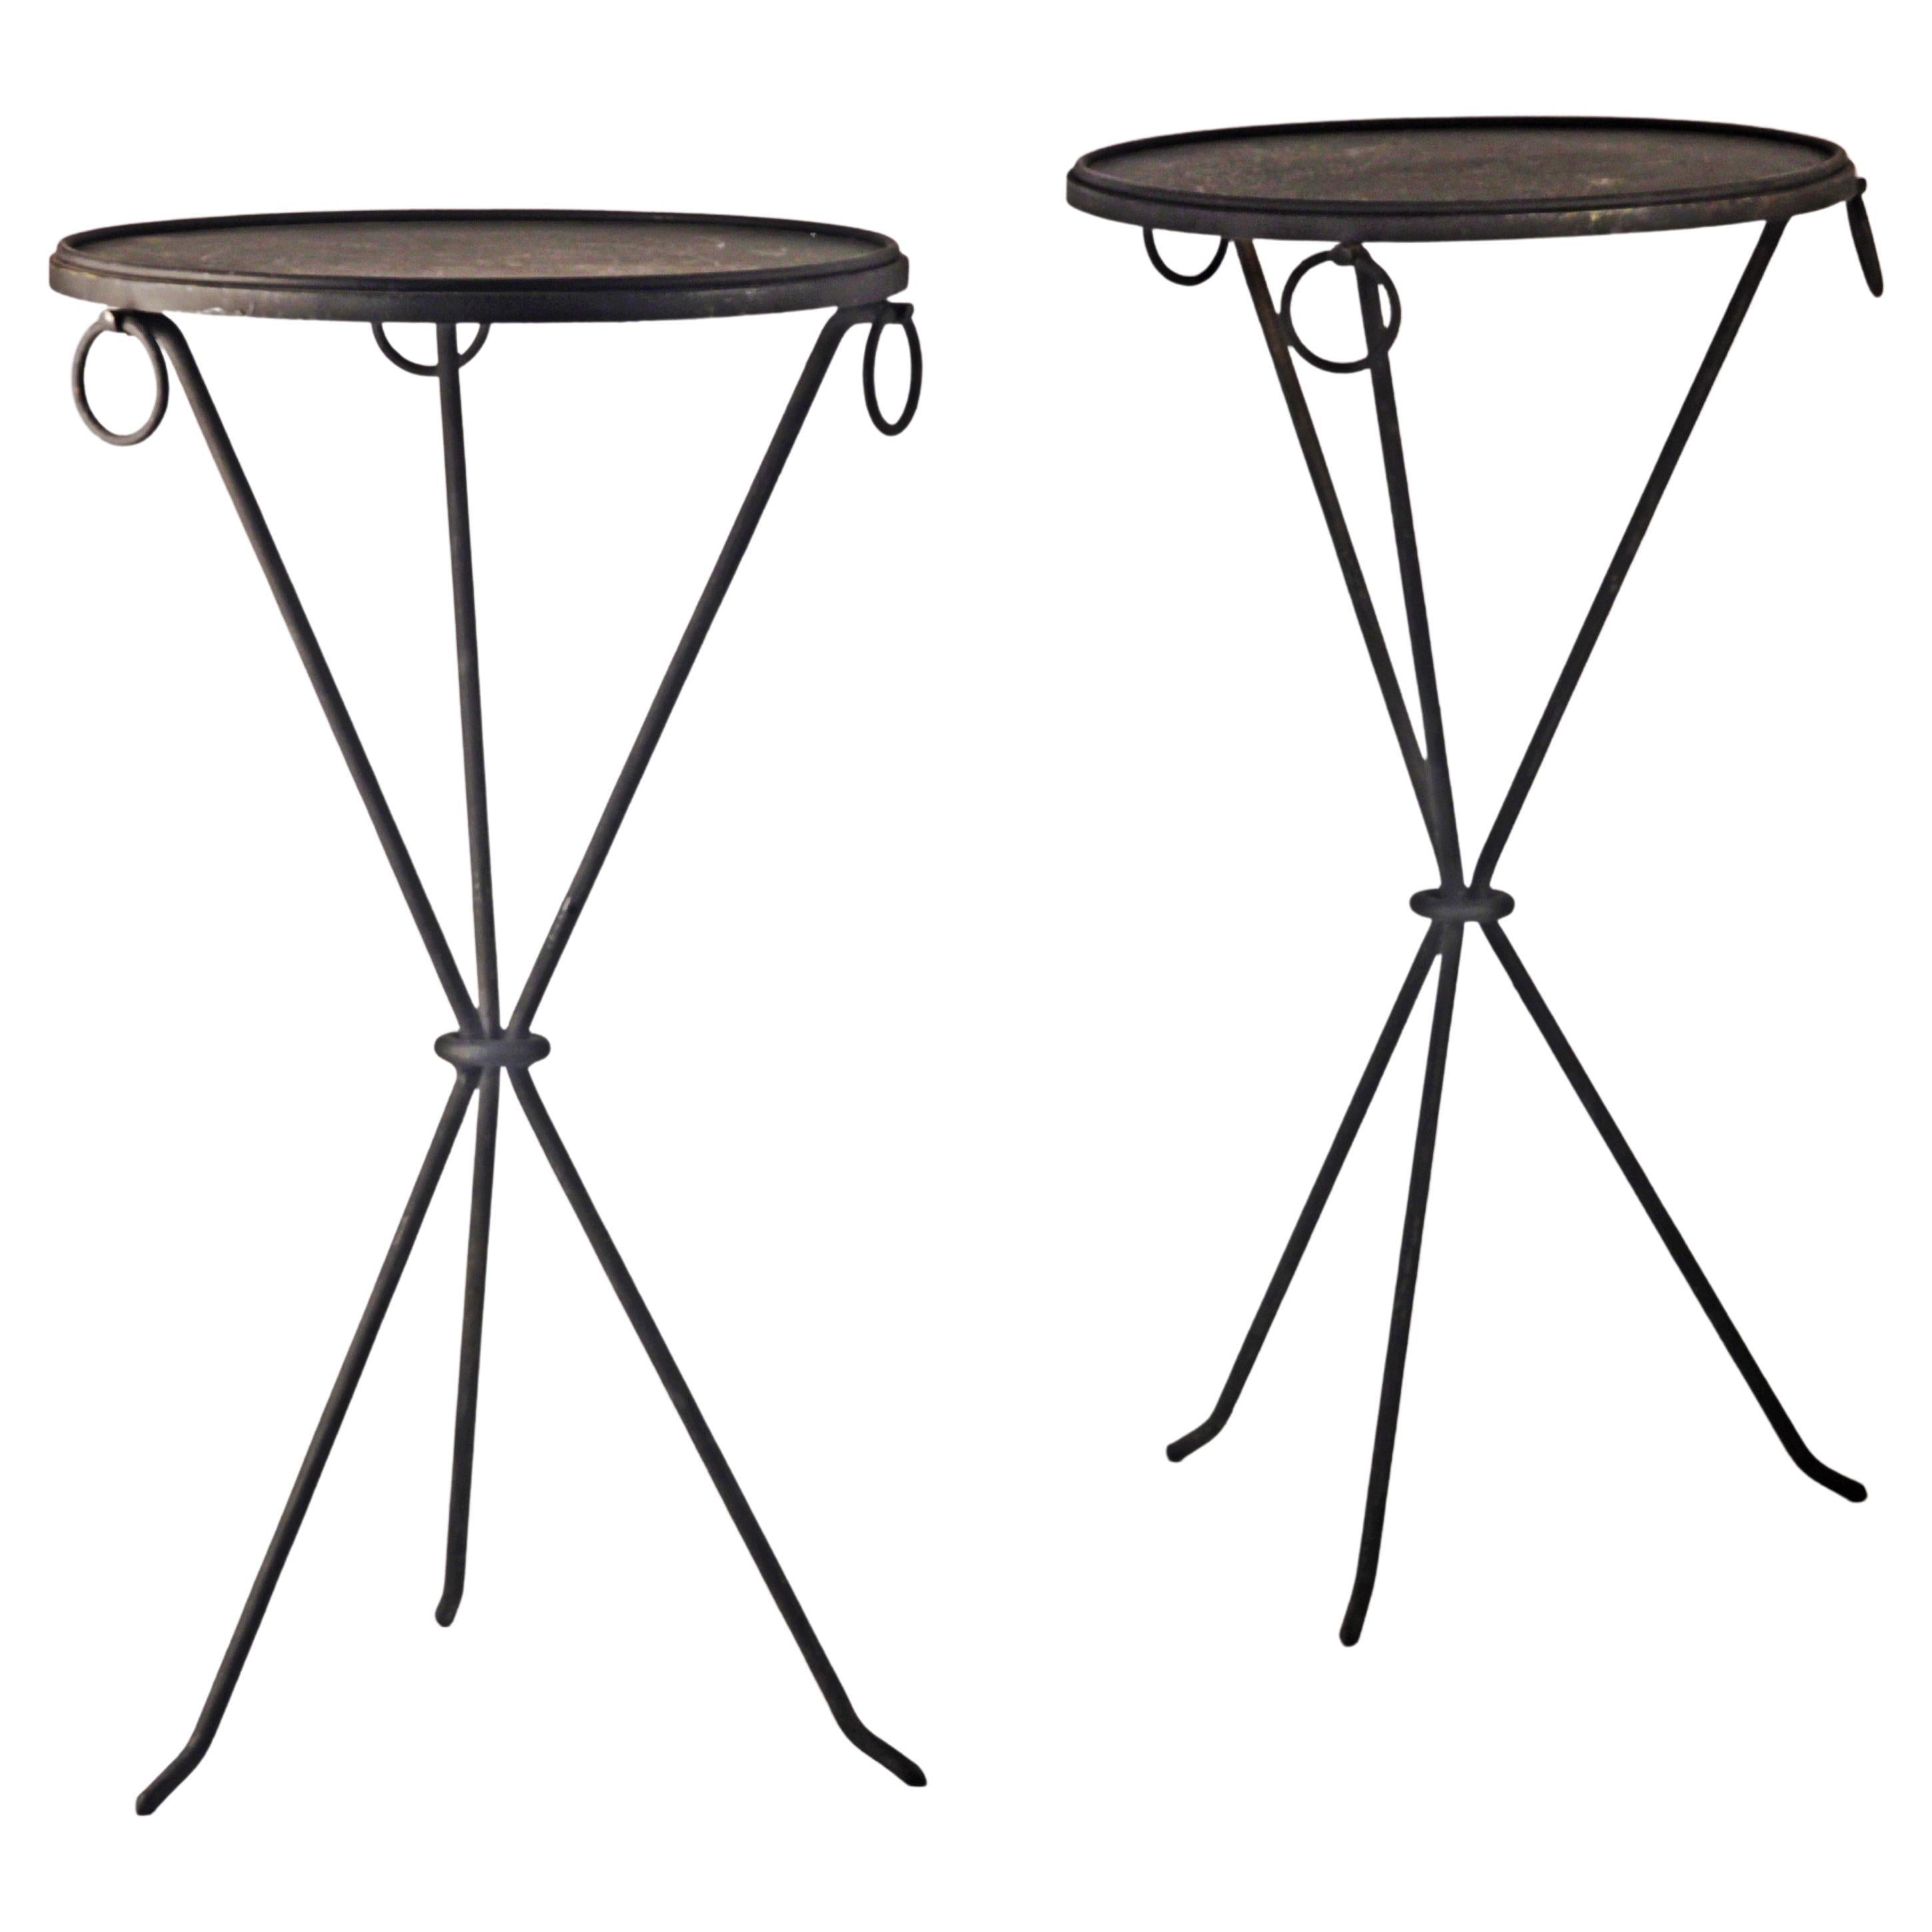 Pair of Guéridons Tables by Jean Michel Frank for Casa Comte, Argentina